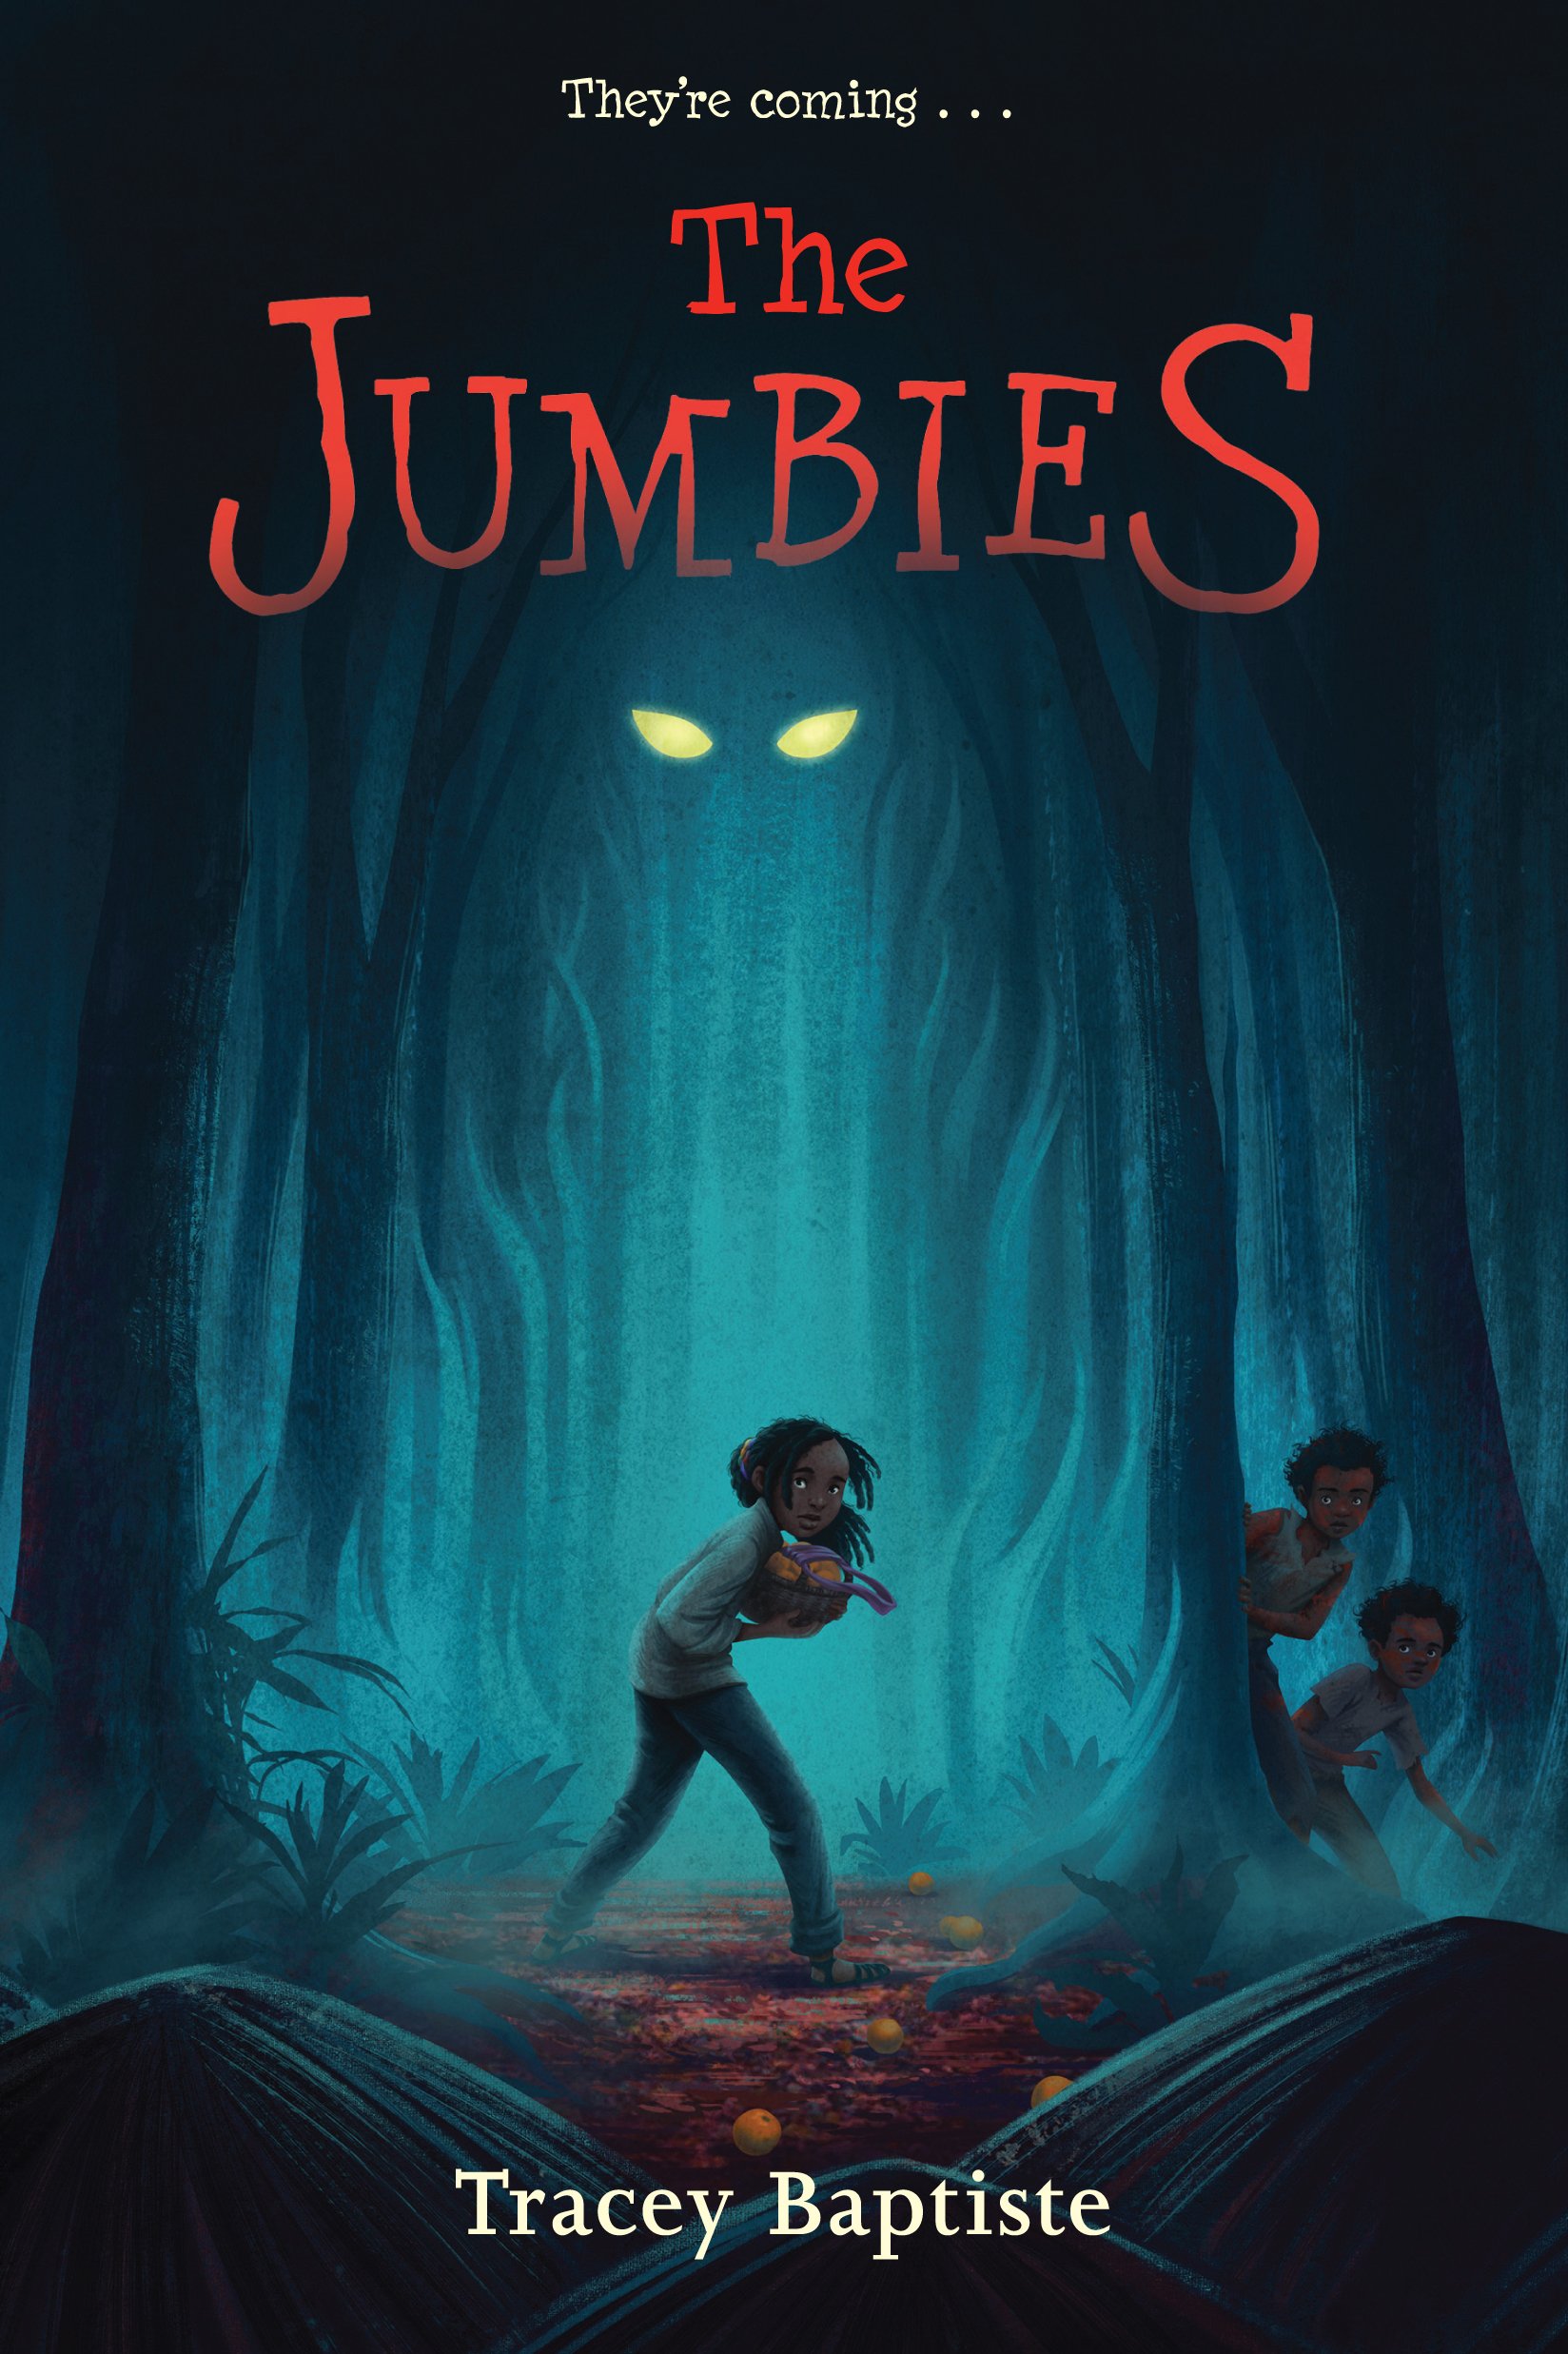 The cover of "The Jumbies" by Tracey Baptiste, featuring an eerily glowing pair of eyes hovering over a wary-looking Black girl who is holding a bag.